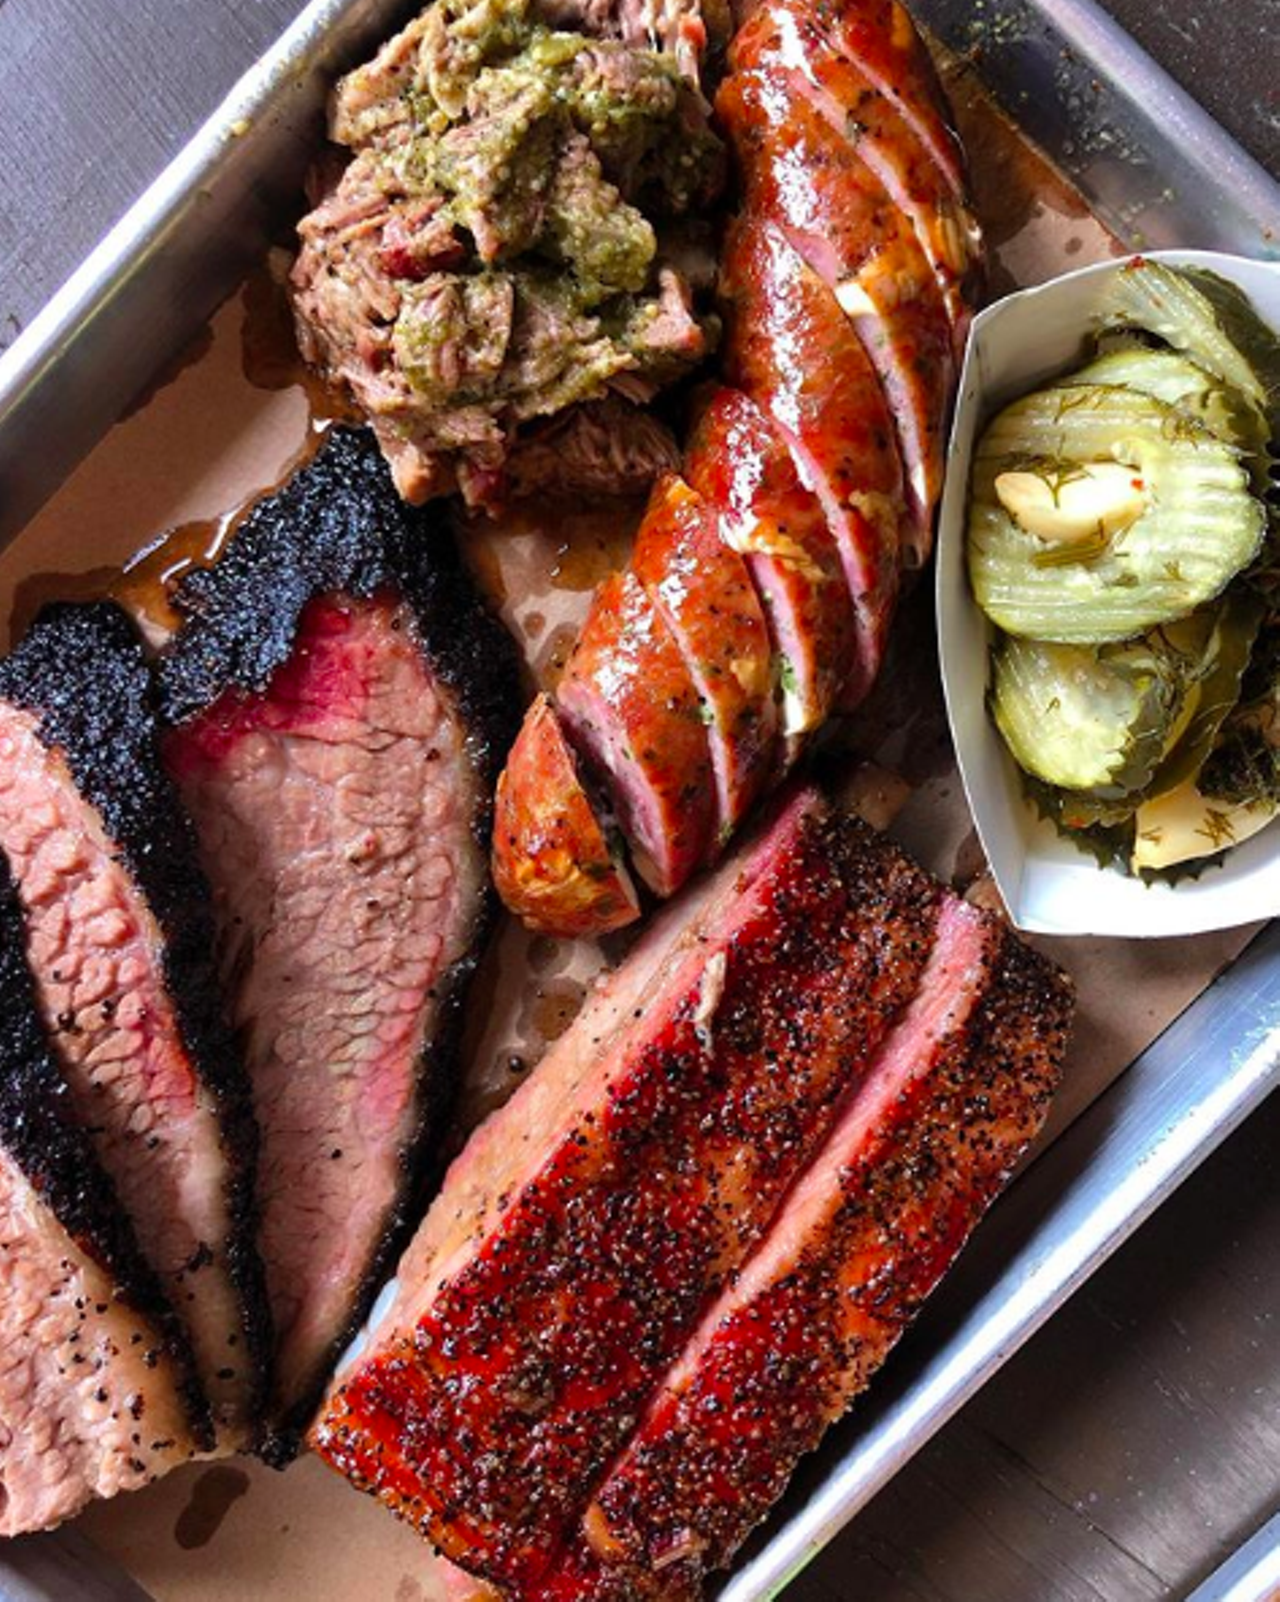 2M Smokehouse
2731 S WW White Road, (210) 885-9352, 2msmokehouse.com
You don’t have to travel far for great barbecue, thanks to 2M Smokehouse. Pitmaster Esaul Ramos opened the BBQ joint in late 2016 with fatty brisket, tender ribs, smoky sandwiches and tacos, and has since garnered national praise from publications including Texas Monthly.
Photo via Instagram / ashleahalpern